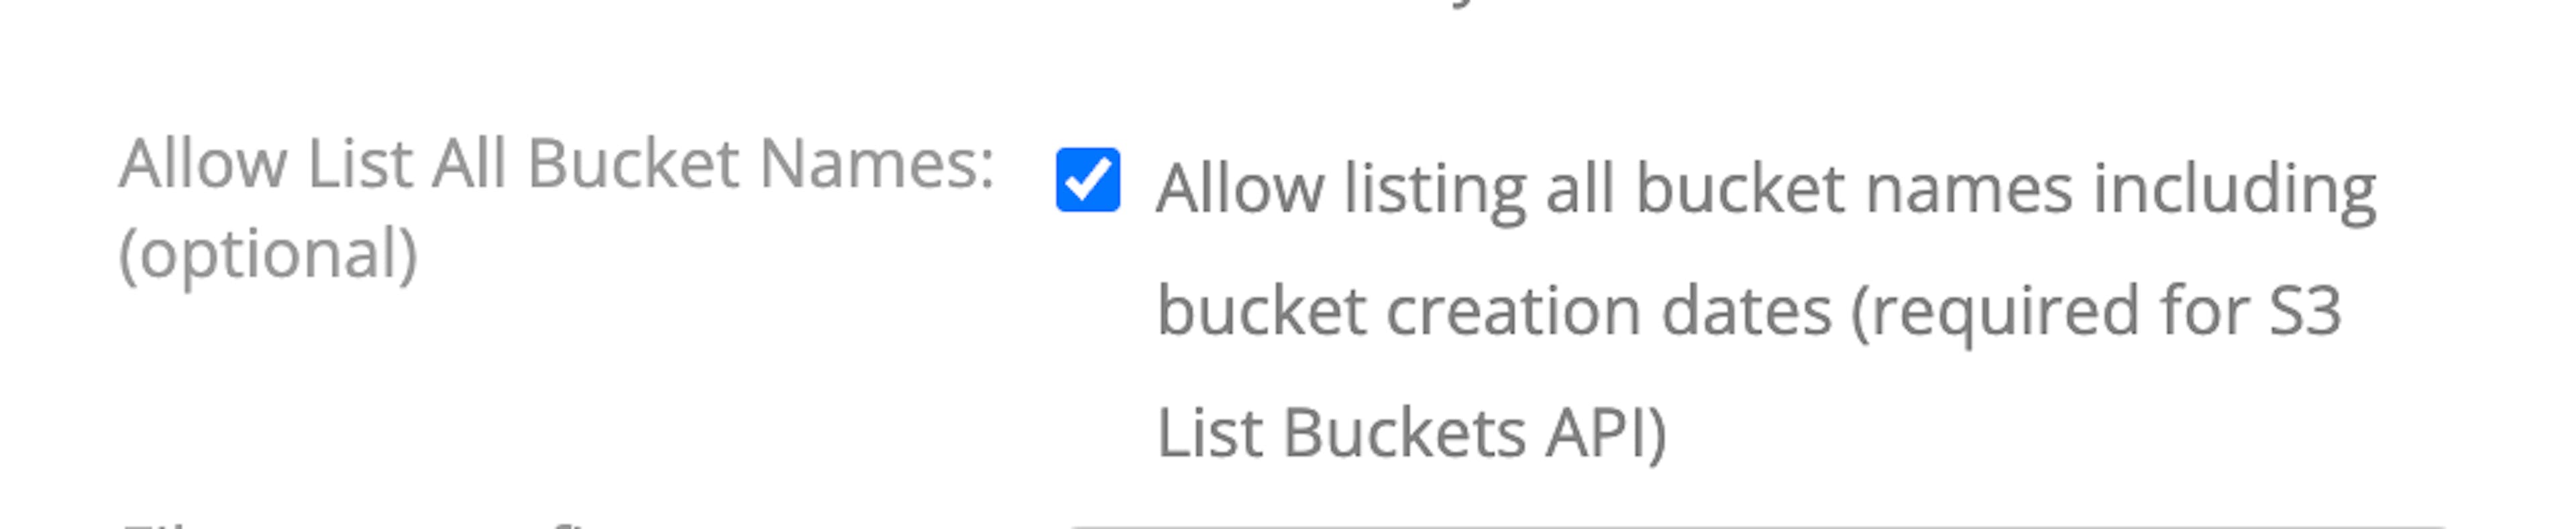 Attention! If you choose to give access to a specific bucket, make sure to check the Allow List All Bucket Names checkbox, otherwise you will encounter an error when configuring backups in Virtualmin.